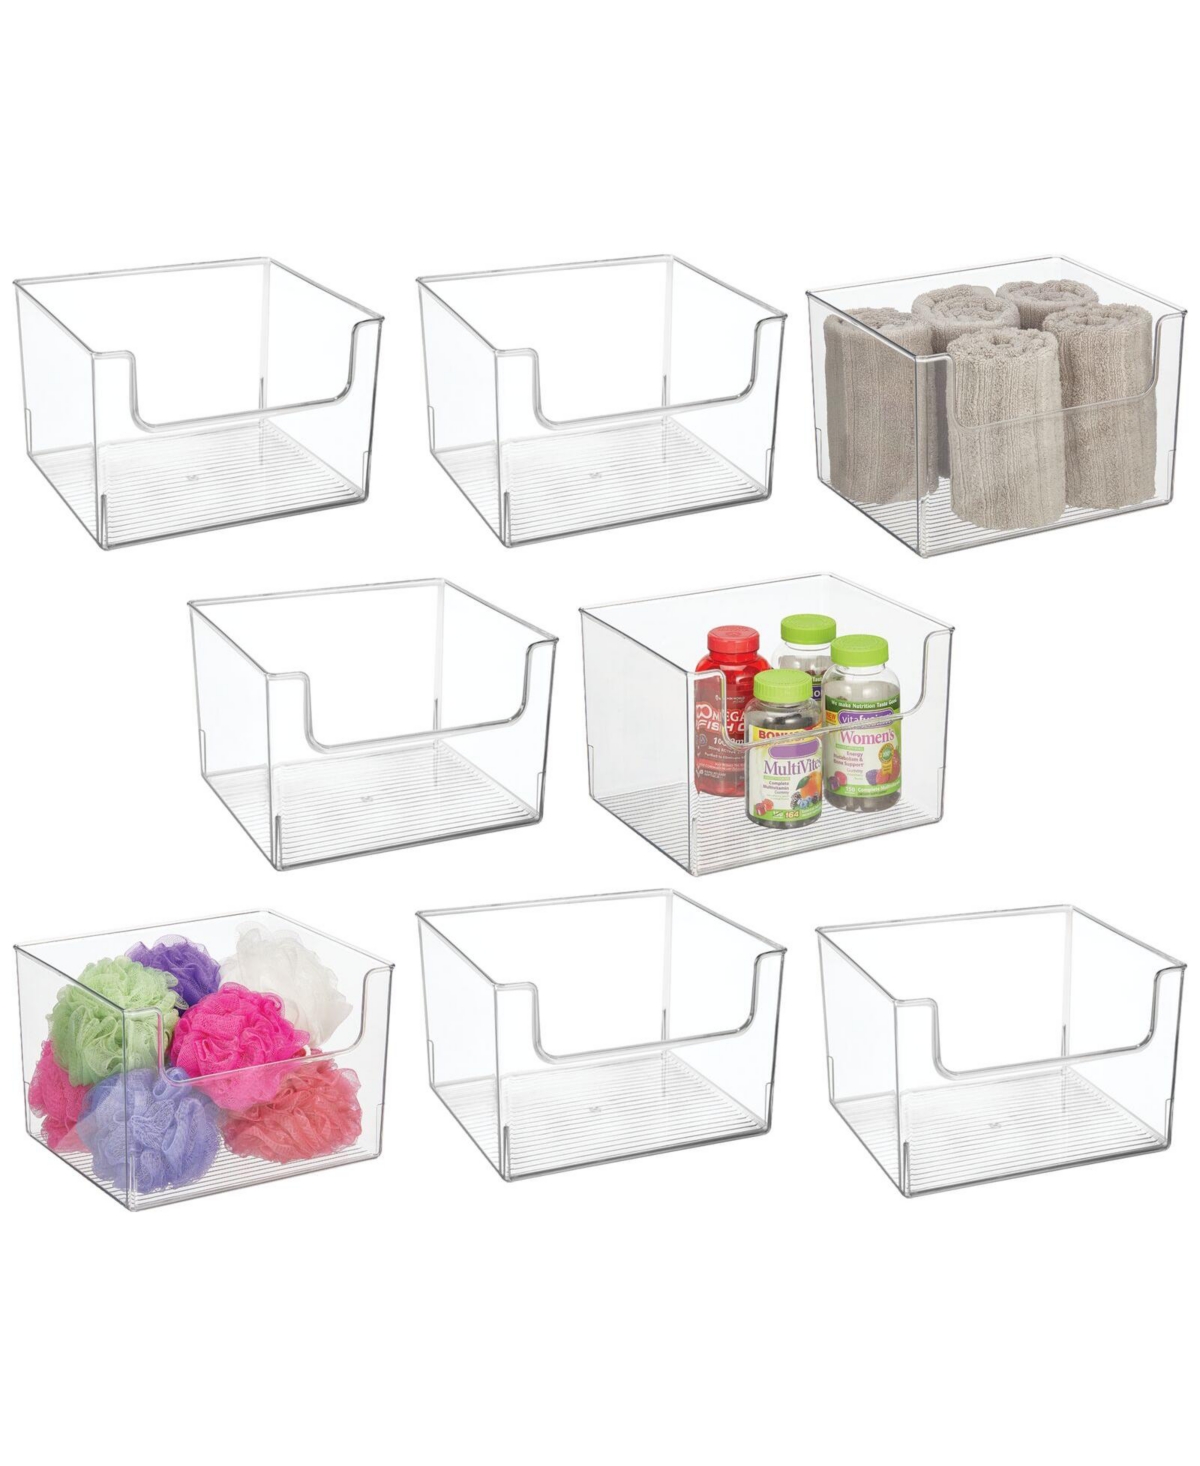 Plastic Bathroom Storage Organizer Bin with Open Front - 8 Pack - 12 x 10 x 8 - Clear